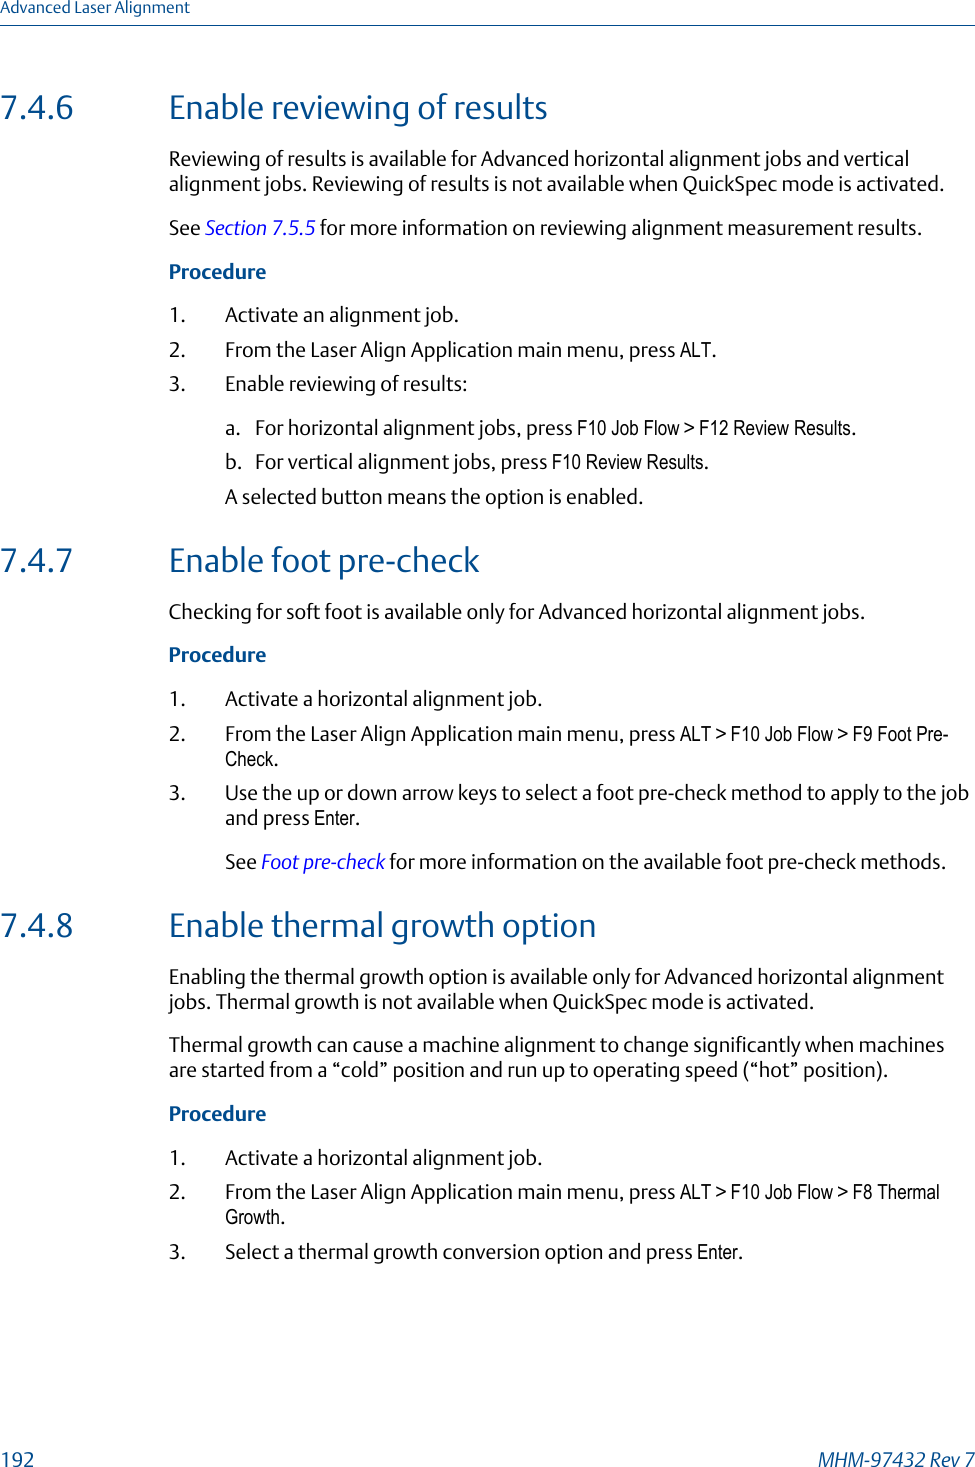 7.4.6 Enable reviewing of resultsReviewing of results is available for Advanced horizontal alignment jobs and verticalalignment jobs. Reviewing of results is not available when QuickSpec mode is activated.See Section 7.5.5 for more information on reviewing alignment measurement results.Procedure1. Activate an alignment job.2. From the Laser Align Application main menu, press ALT.3. Enable reviewing of results:a. For horizontal alignment jobs, press F10 Job Flow &gt; F12 Review Results.b. For vertical alignment jobs, press F10 Review Results.A selected button means the option is enabled.7.4.7 Enable foot pre-checkChecking for soft foot is available only for Advanced horizontal alignment jobs.Procedure1. Activate a horizontal alignment job.2. From the Laser Align Application main menu, press ALT &gt; F10 Job Flow &gt; F9 Foot Pre-Check.3. Use the up or down arrow keys to select a foot pre-check method to apply to the joband press Enter.See Foot pre-check for more information on the available foot pre-check methods.7.4.8 Enable thermal growth optionEnabling the thermal growth option is available only for Advanced horizontal alignmentjobs. Thermal growth is not available when QuickSpec mode is activated.Thermal growth can cause a machine alignment to change significantly when machinesare started from a “cold” position and run up to operating speed (“hot” position).Procedure1. Activate a horizontal alignment job.2. From the Laser Align Application main menu, press ALT &gt; F10 Job Flow &gt; F8 ThermalGrowth.3. Select a thermal growth conversion option and press Enter.Advanced Laser Alignment192 MHM-97432 Rev 7